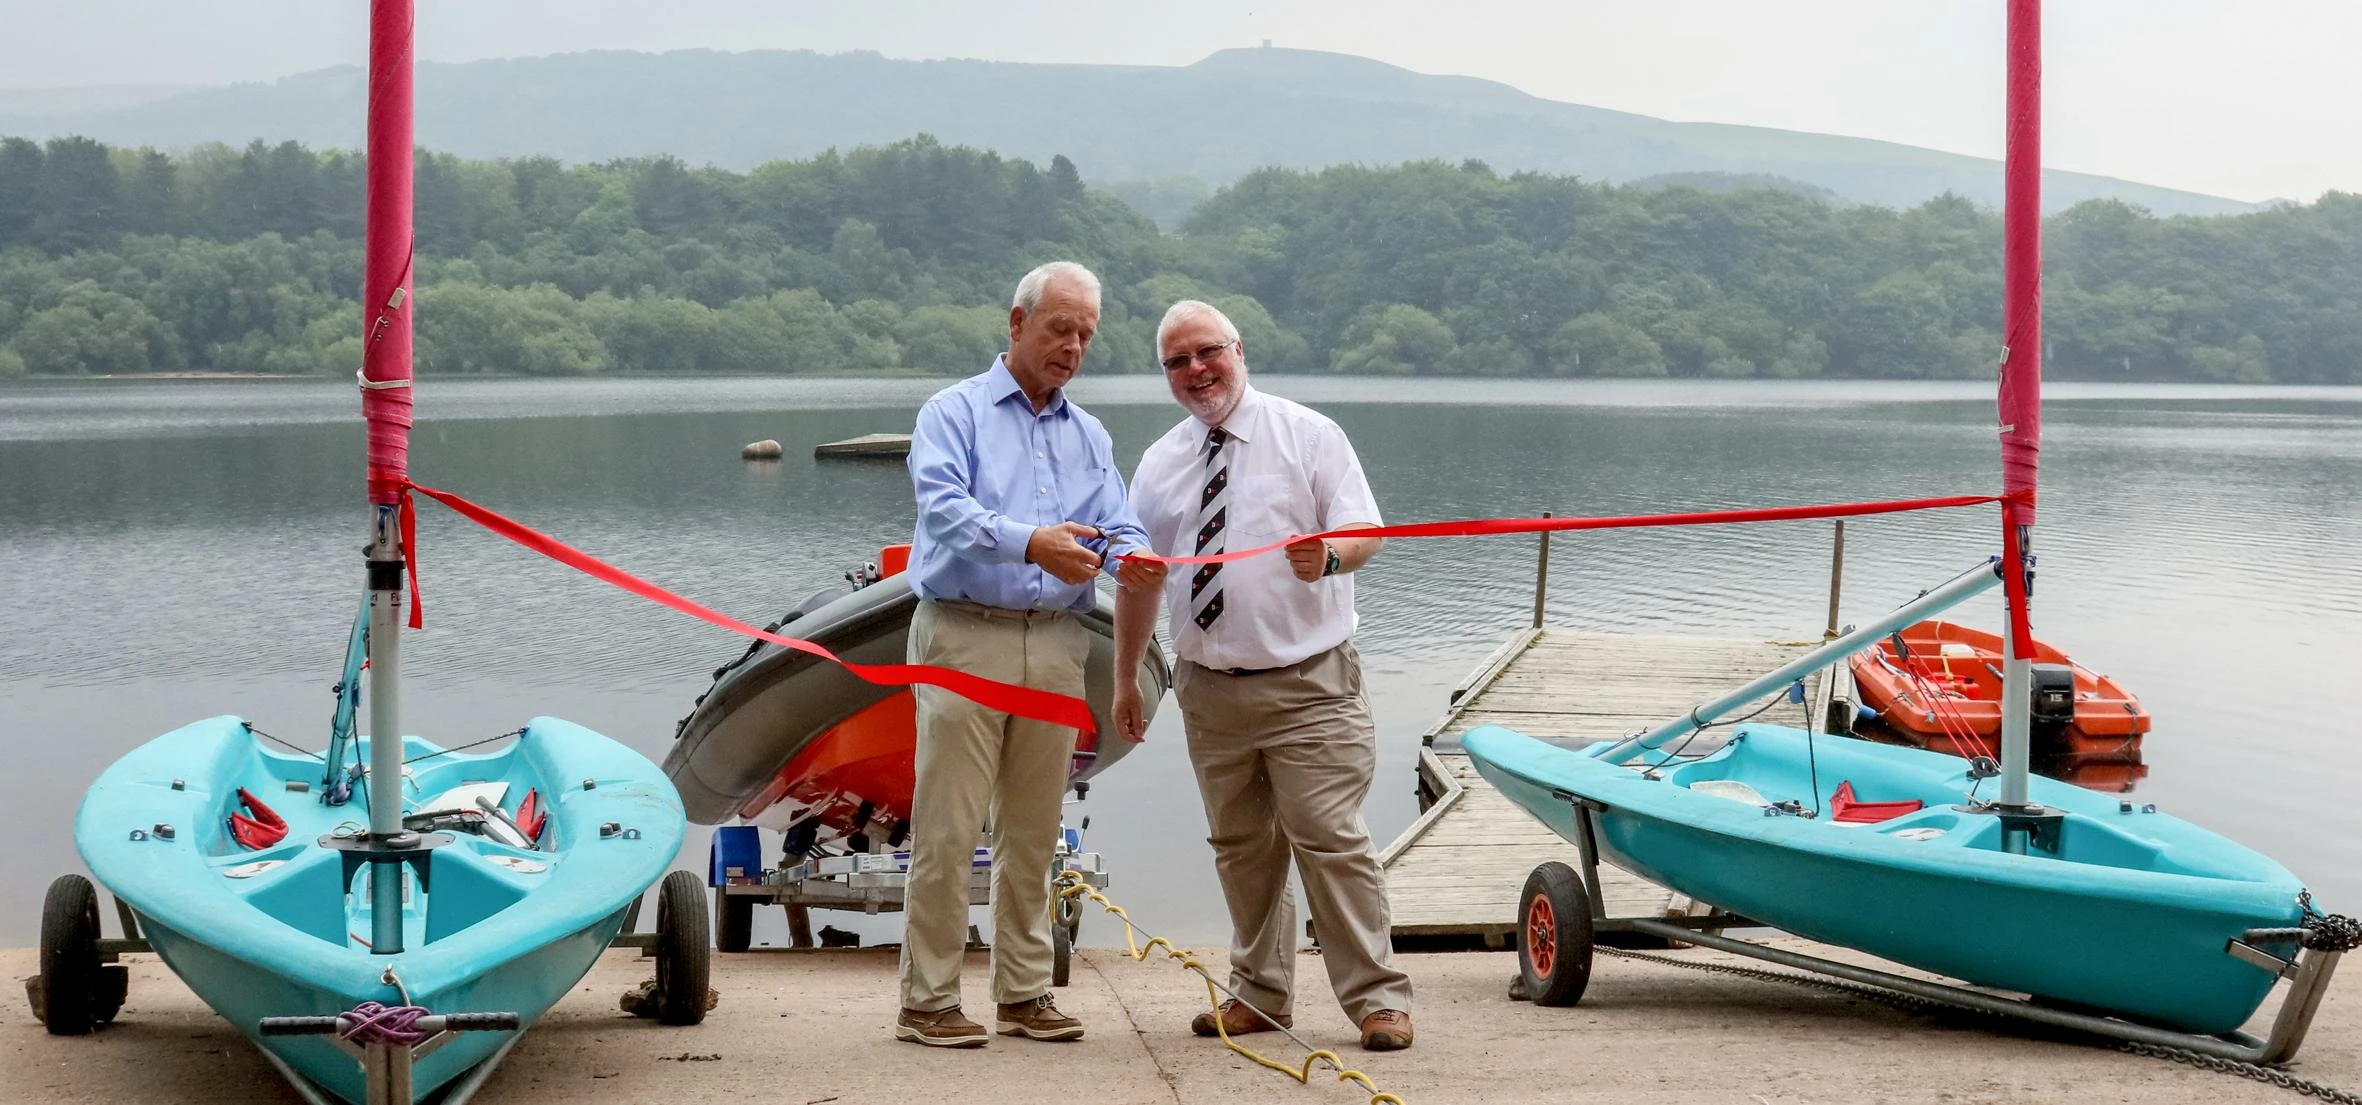 Dave Williamson, Chairman of the RYA with Keith Gillies, chairman of the charity which operates the 